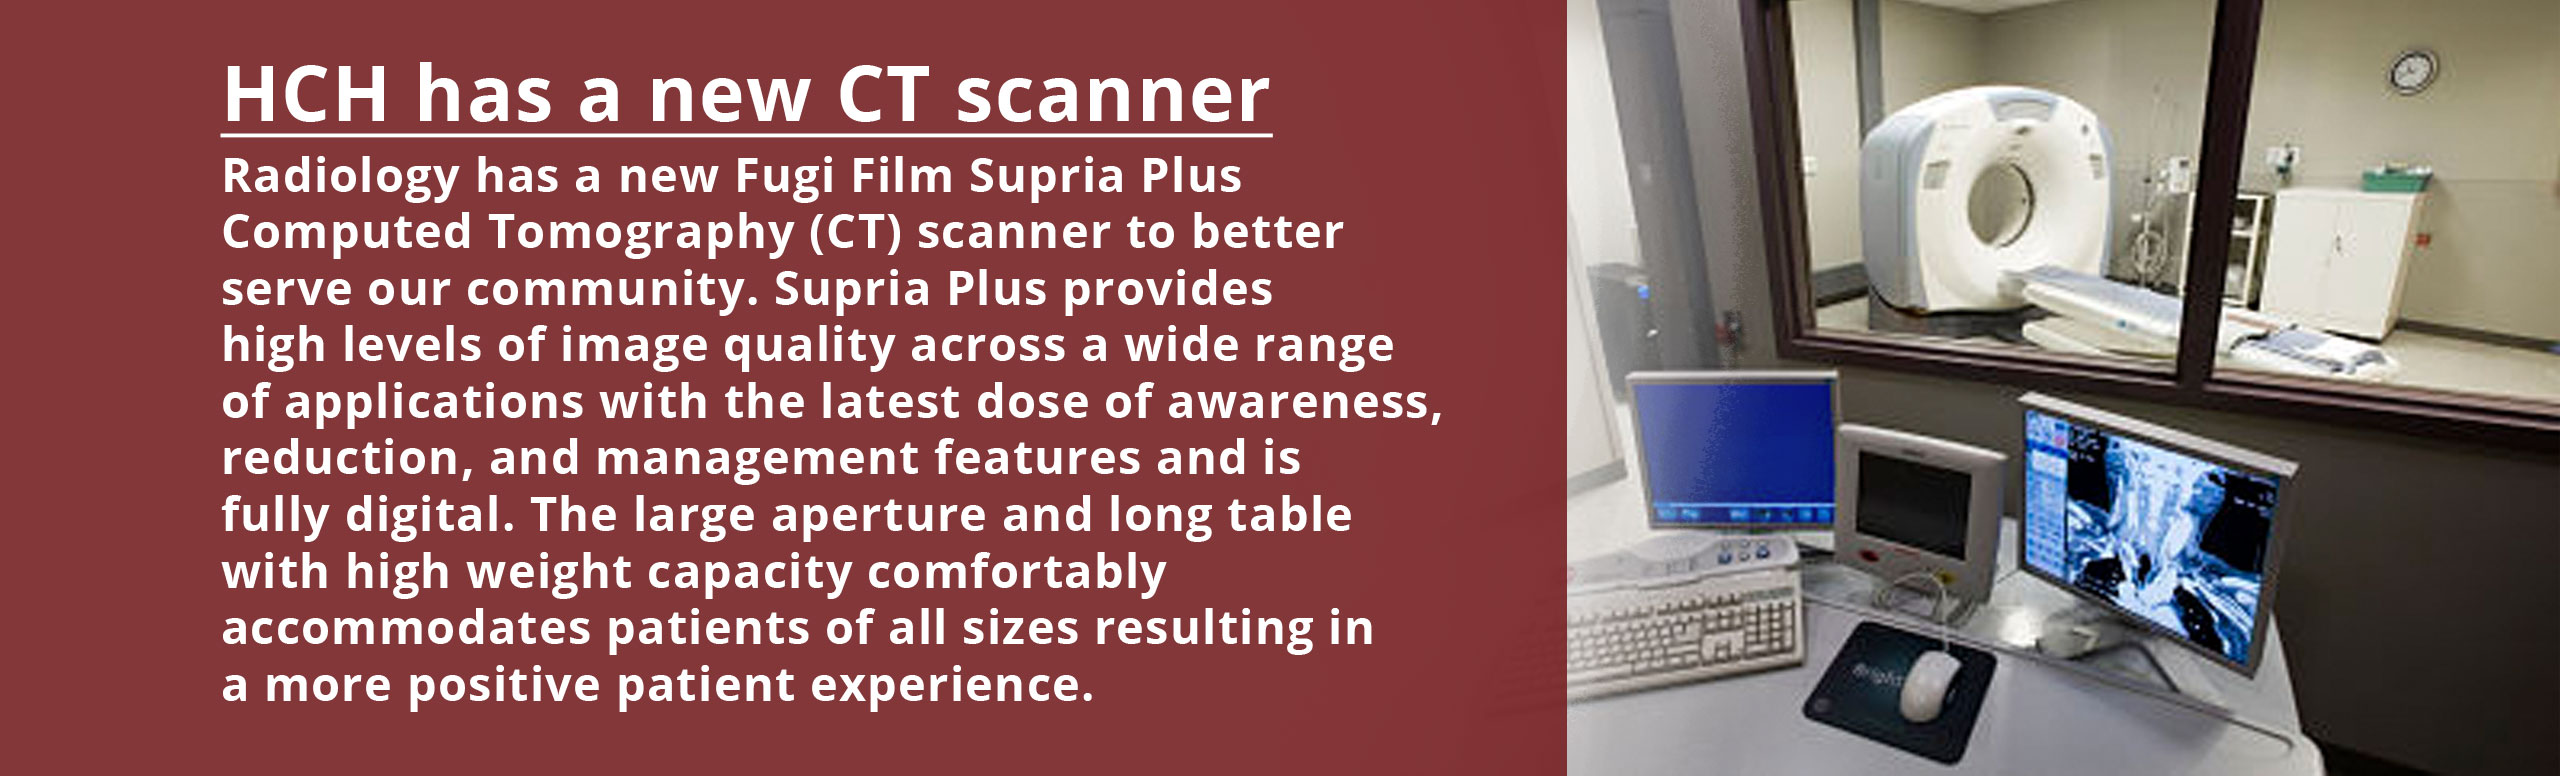 Banner picture of a room with widows that looks into an MRI Scanning room. There is a table with three screens up and one of the screens is an X-Ray. Banner says:


HCH has a new CT Scanner
Radiology has a new Fungi Film Supria Plus Computed Tomography (CT) scanner to better serve our community. Supria Plus provides high levels  of image quality across a wide range of applications with the latest dose of awareness, reduction, and management feautie==es  features and is fully digital. The large aperture and long table with high weight capacity comfortably accommodates patients of all sizes resulting in a more positive patient experience.